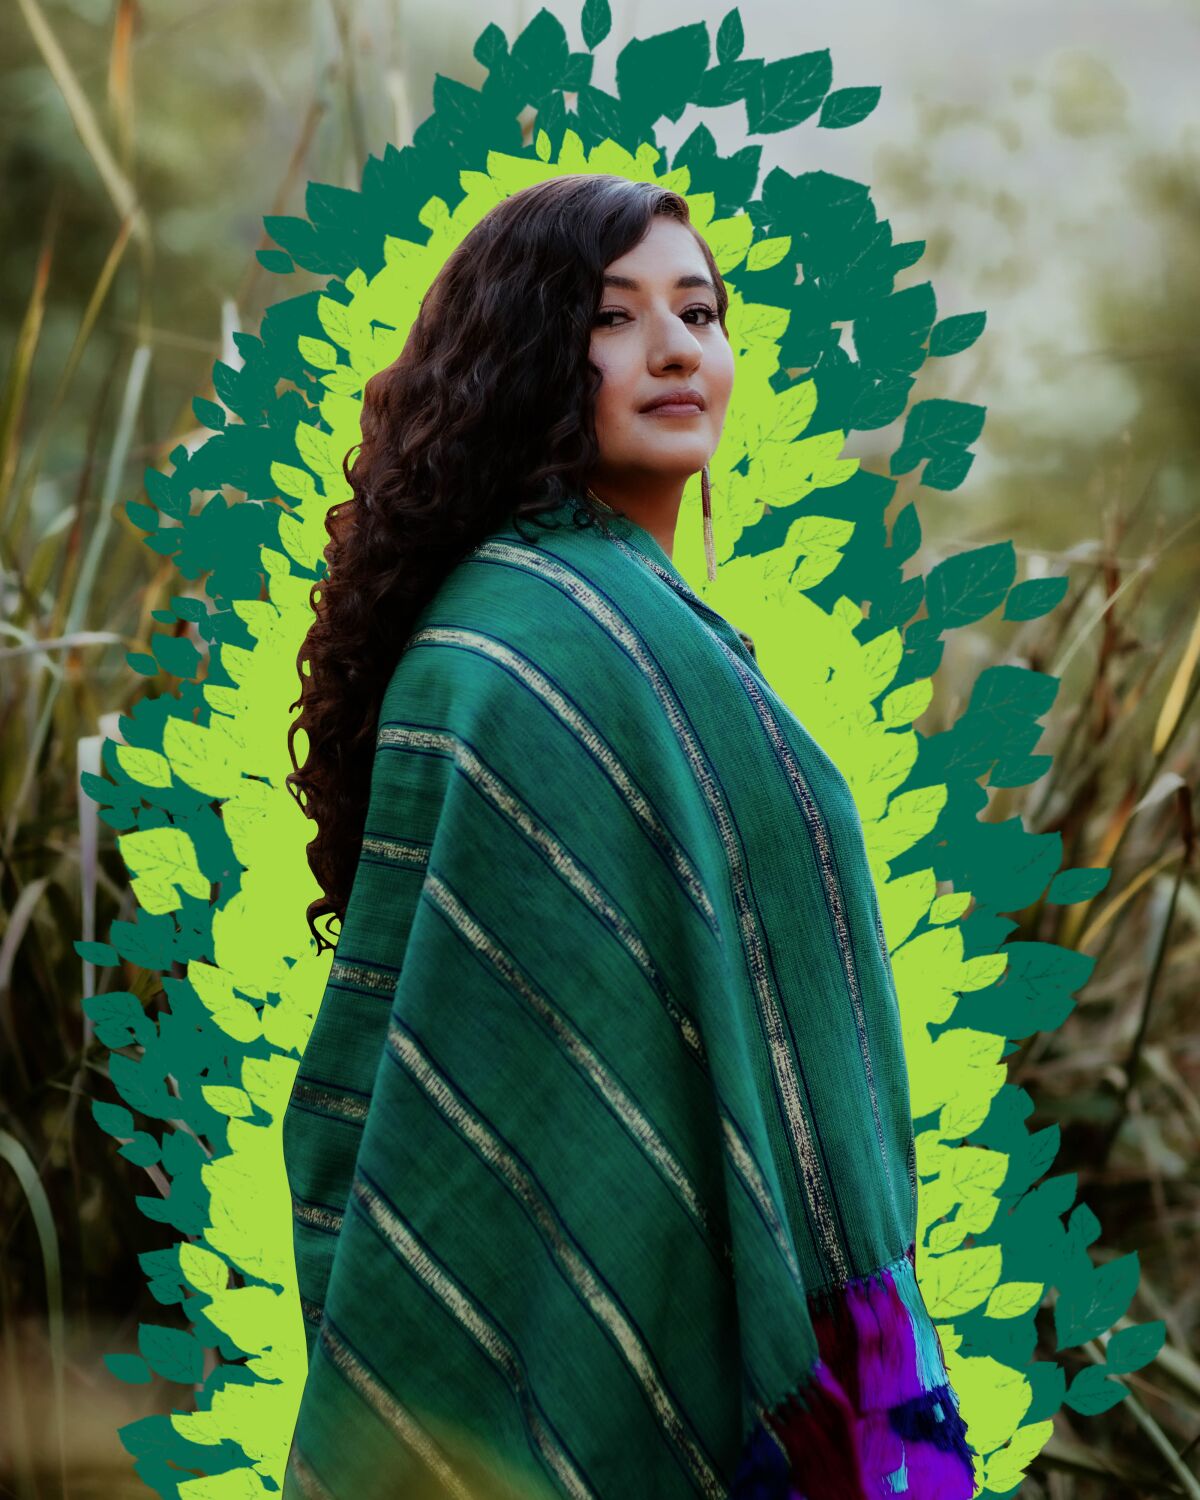 A photo illustration of a woman with long, dark hair in a cape with greenery radiating around her